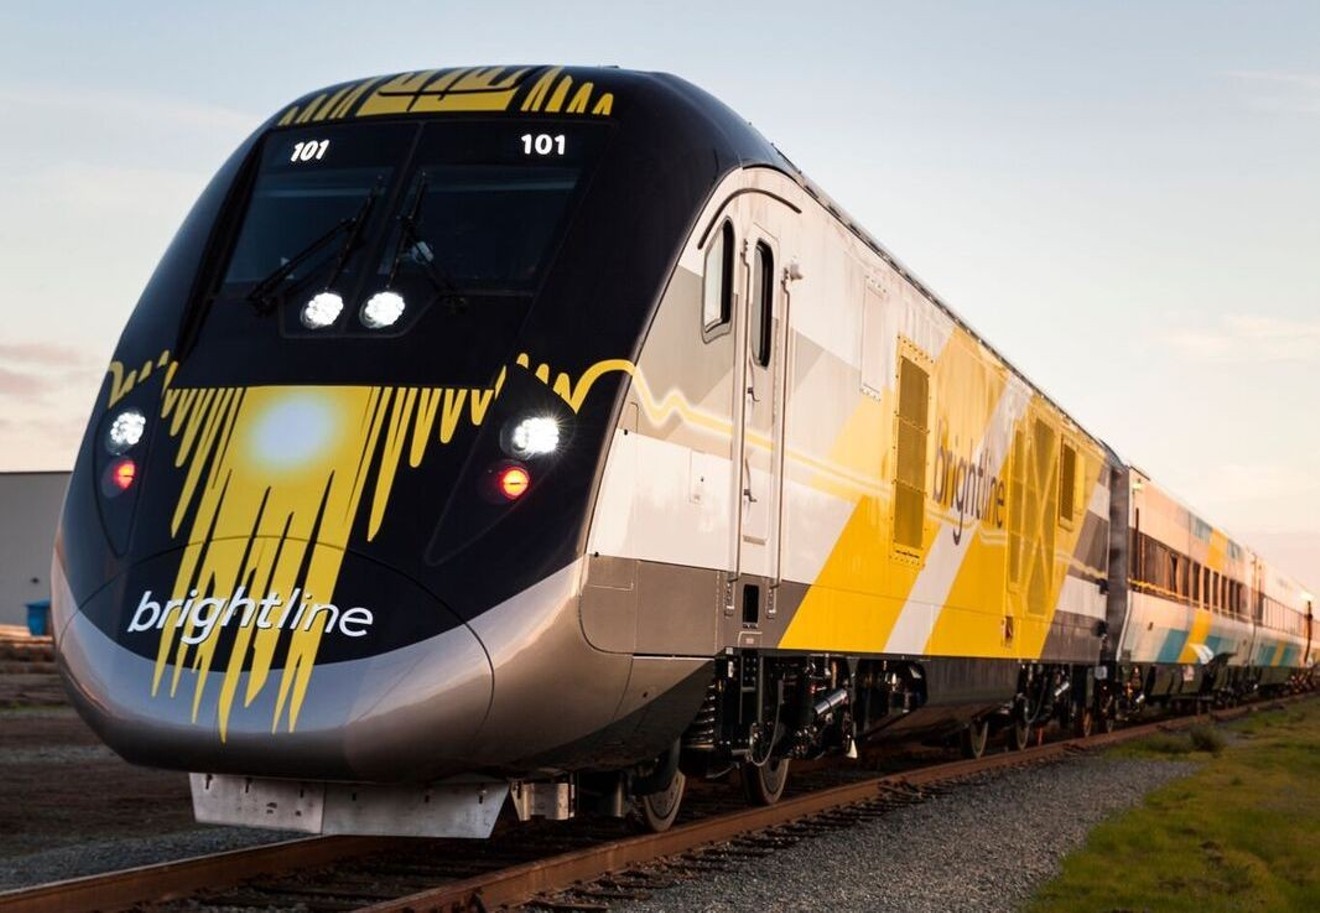 The Associated Press says Brightline is the deadliest train system per mile in America.